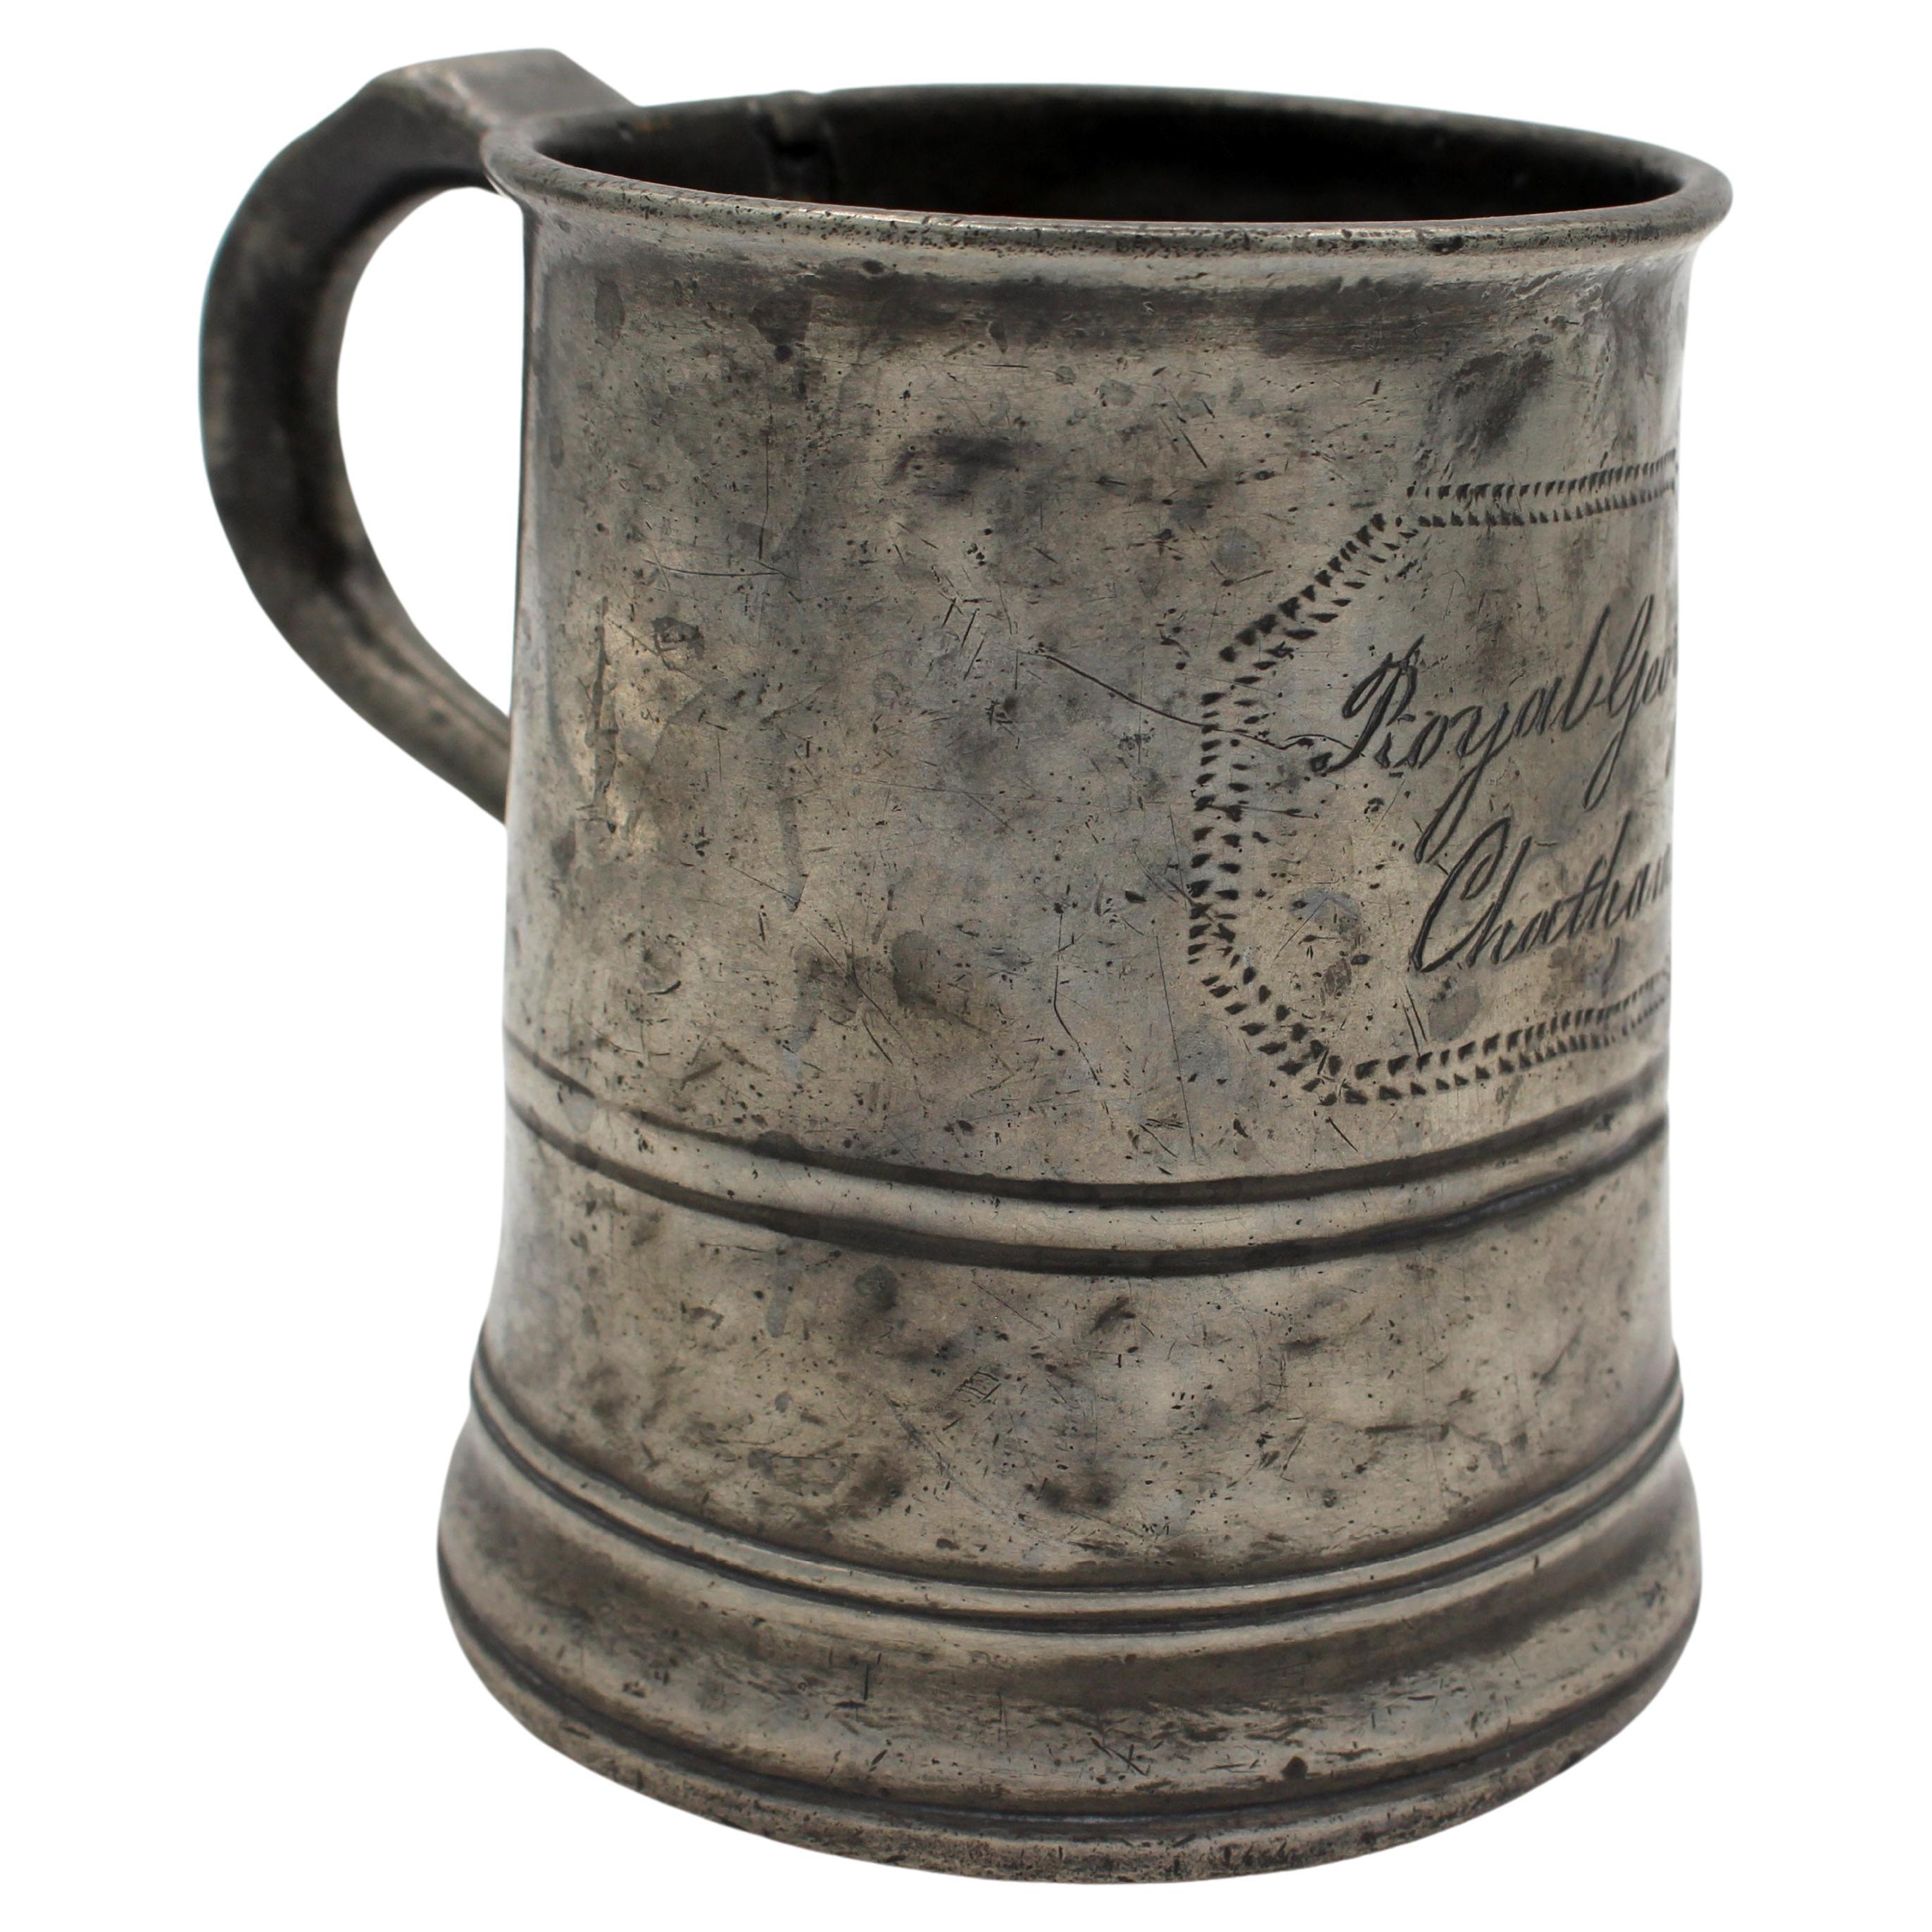 Pewter Taper Sided Tankard from the Royal George, Chatham, c. 1860s